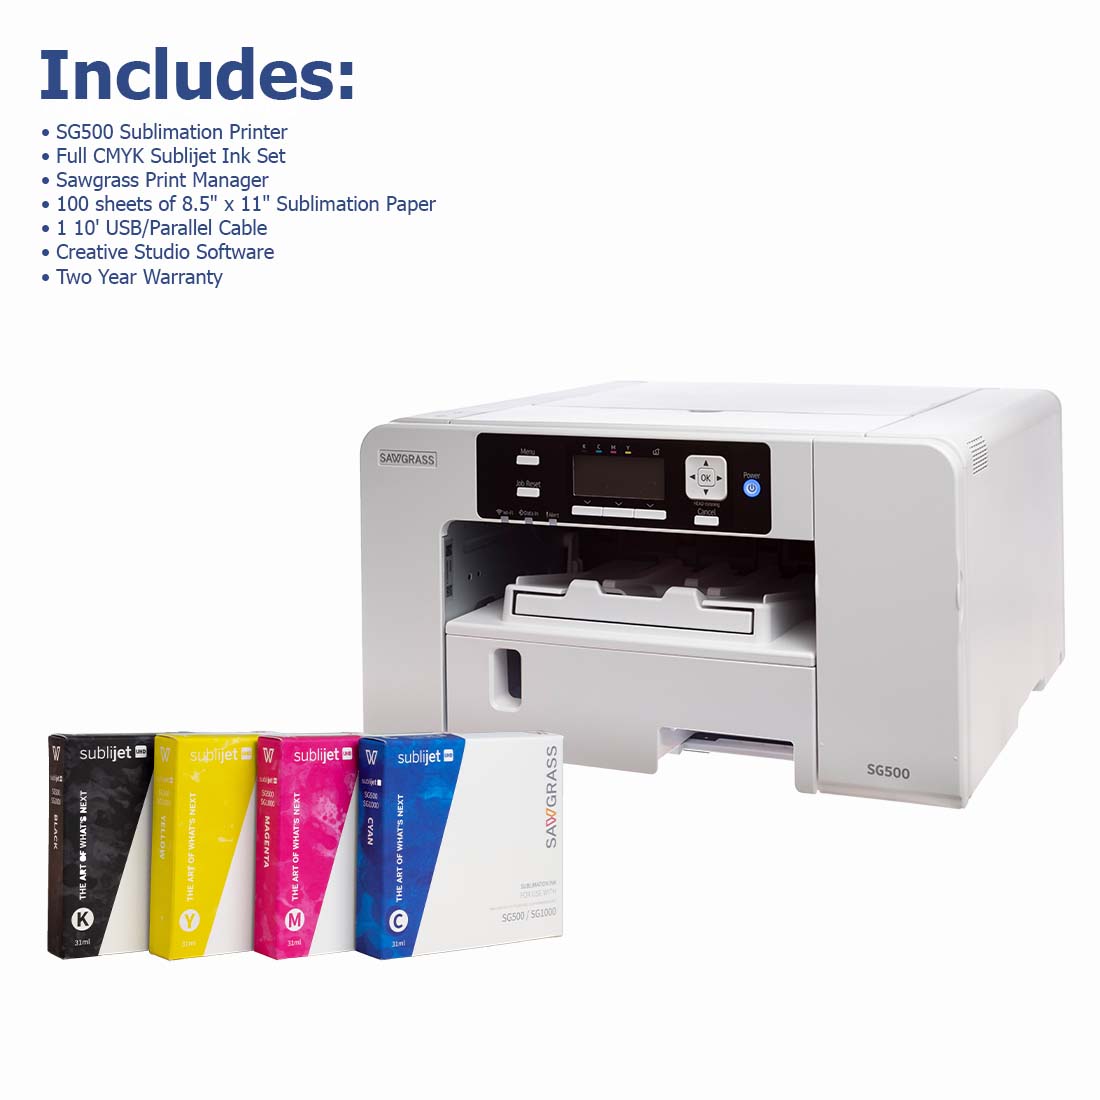 Sawgrass Virtuoso SG500 Sublimation Printer Package - Joto Imaging Supplies Canada